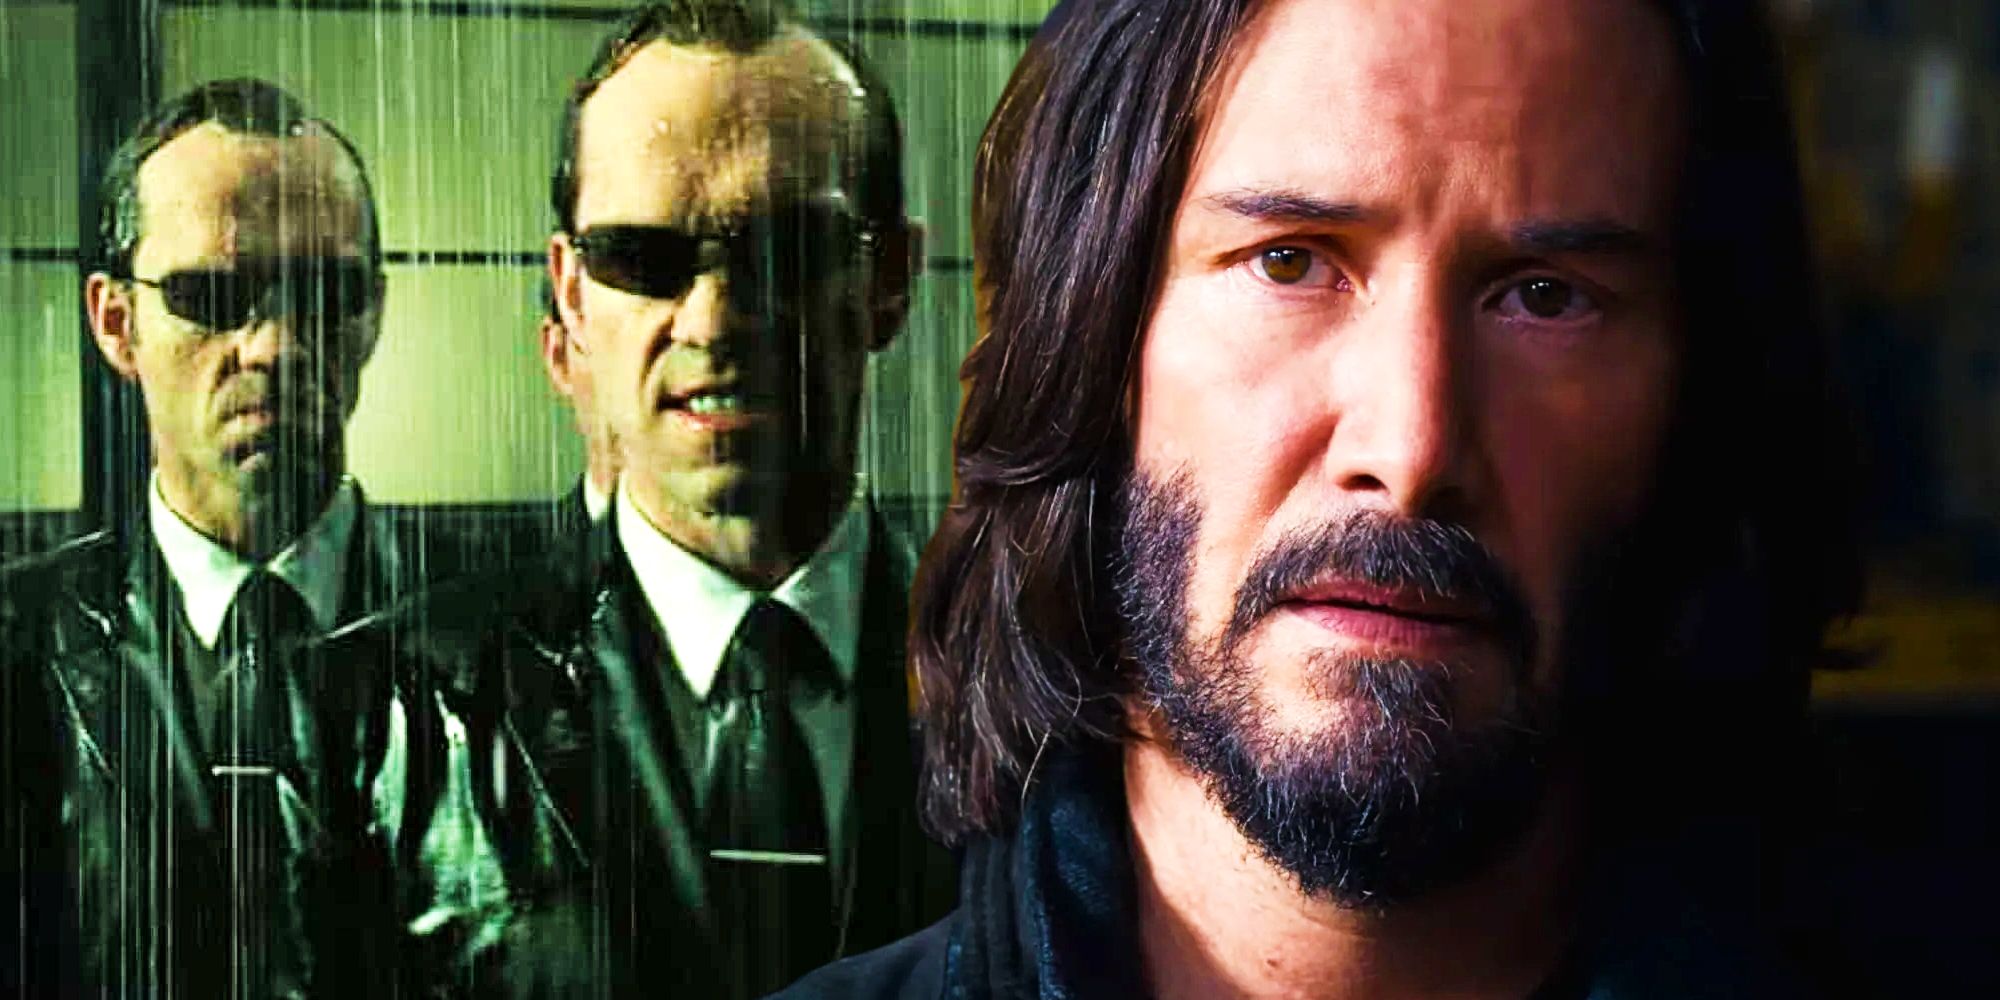 Hugo Weaving as Smith and Keanu Reeves as Neo